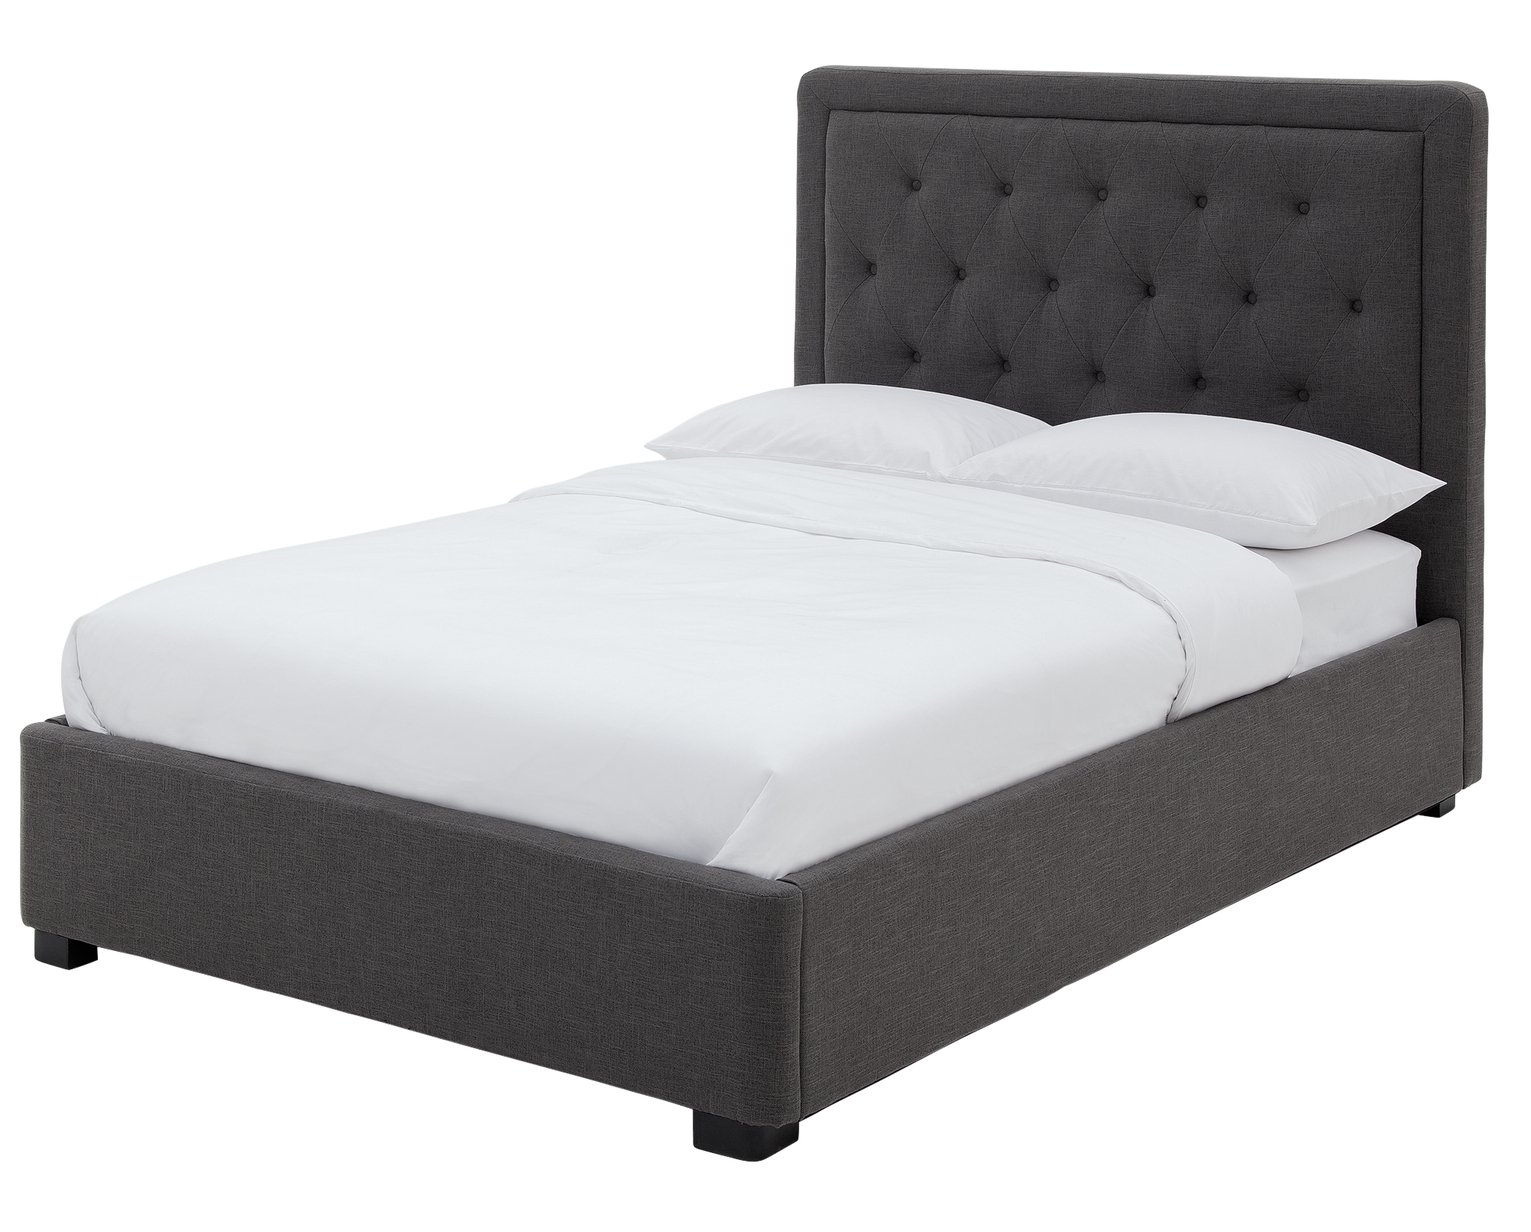 Argos Home Appleby Double Ottoman Bed Frame Review